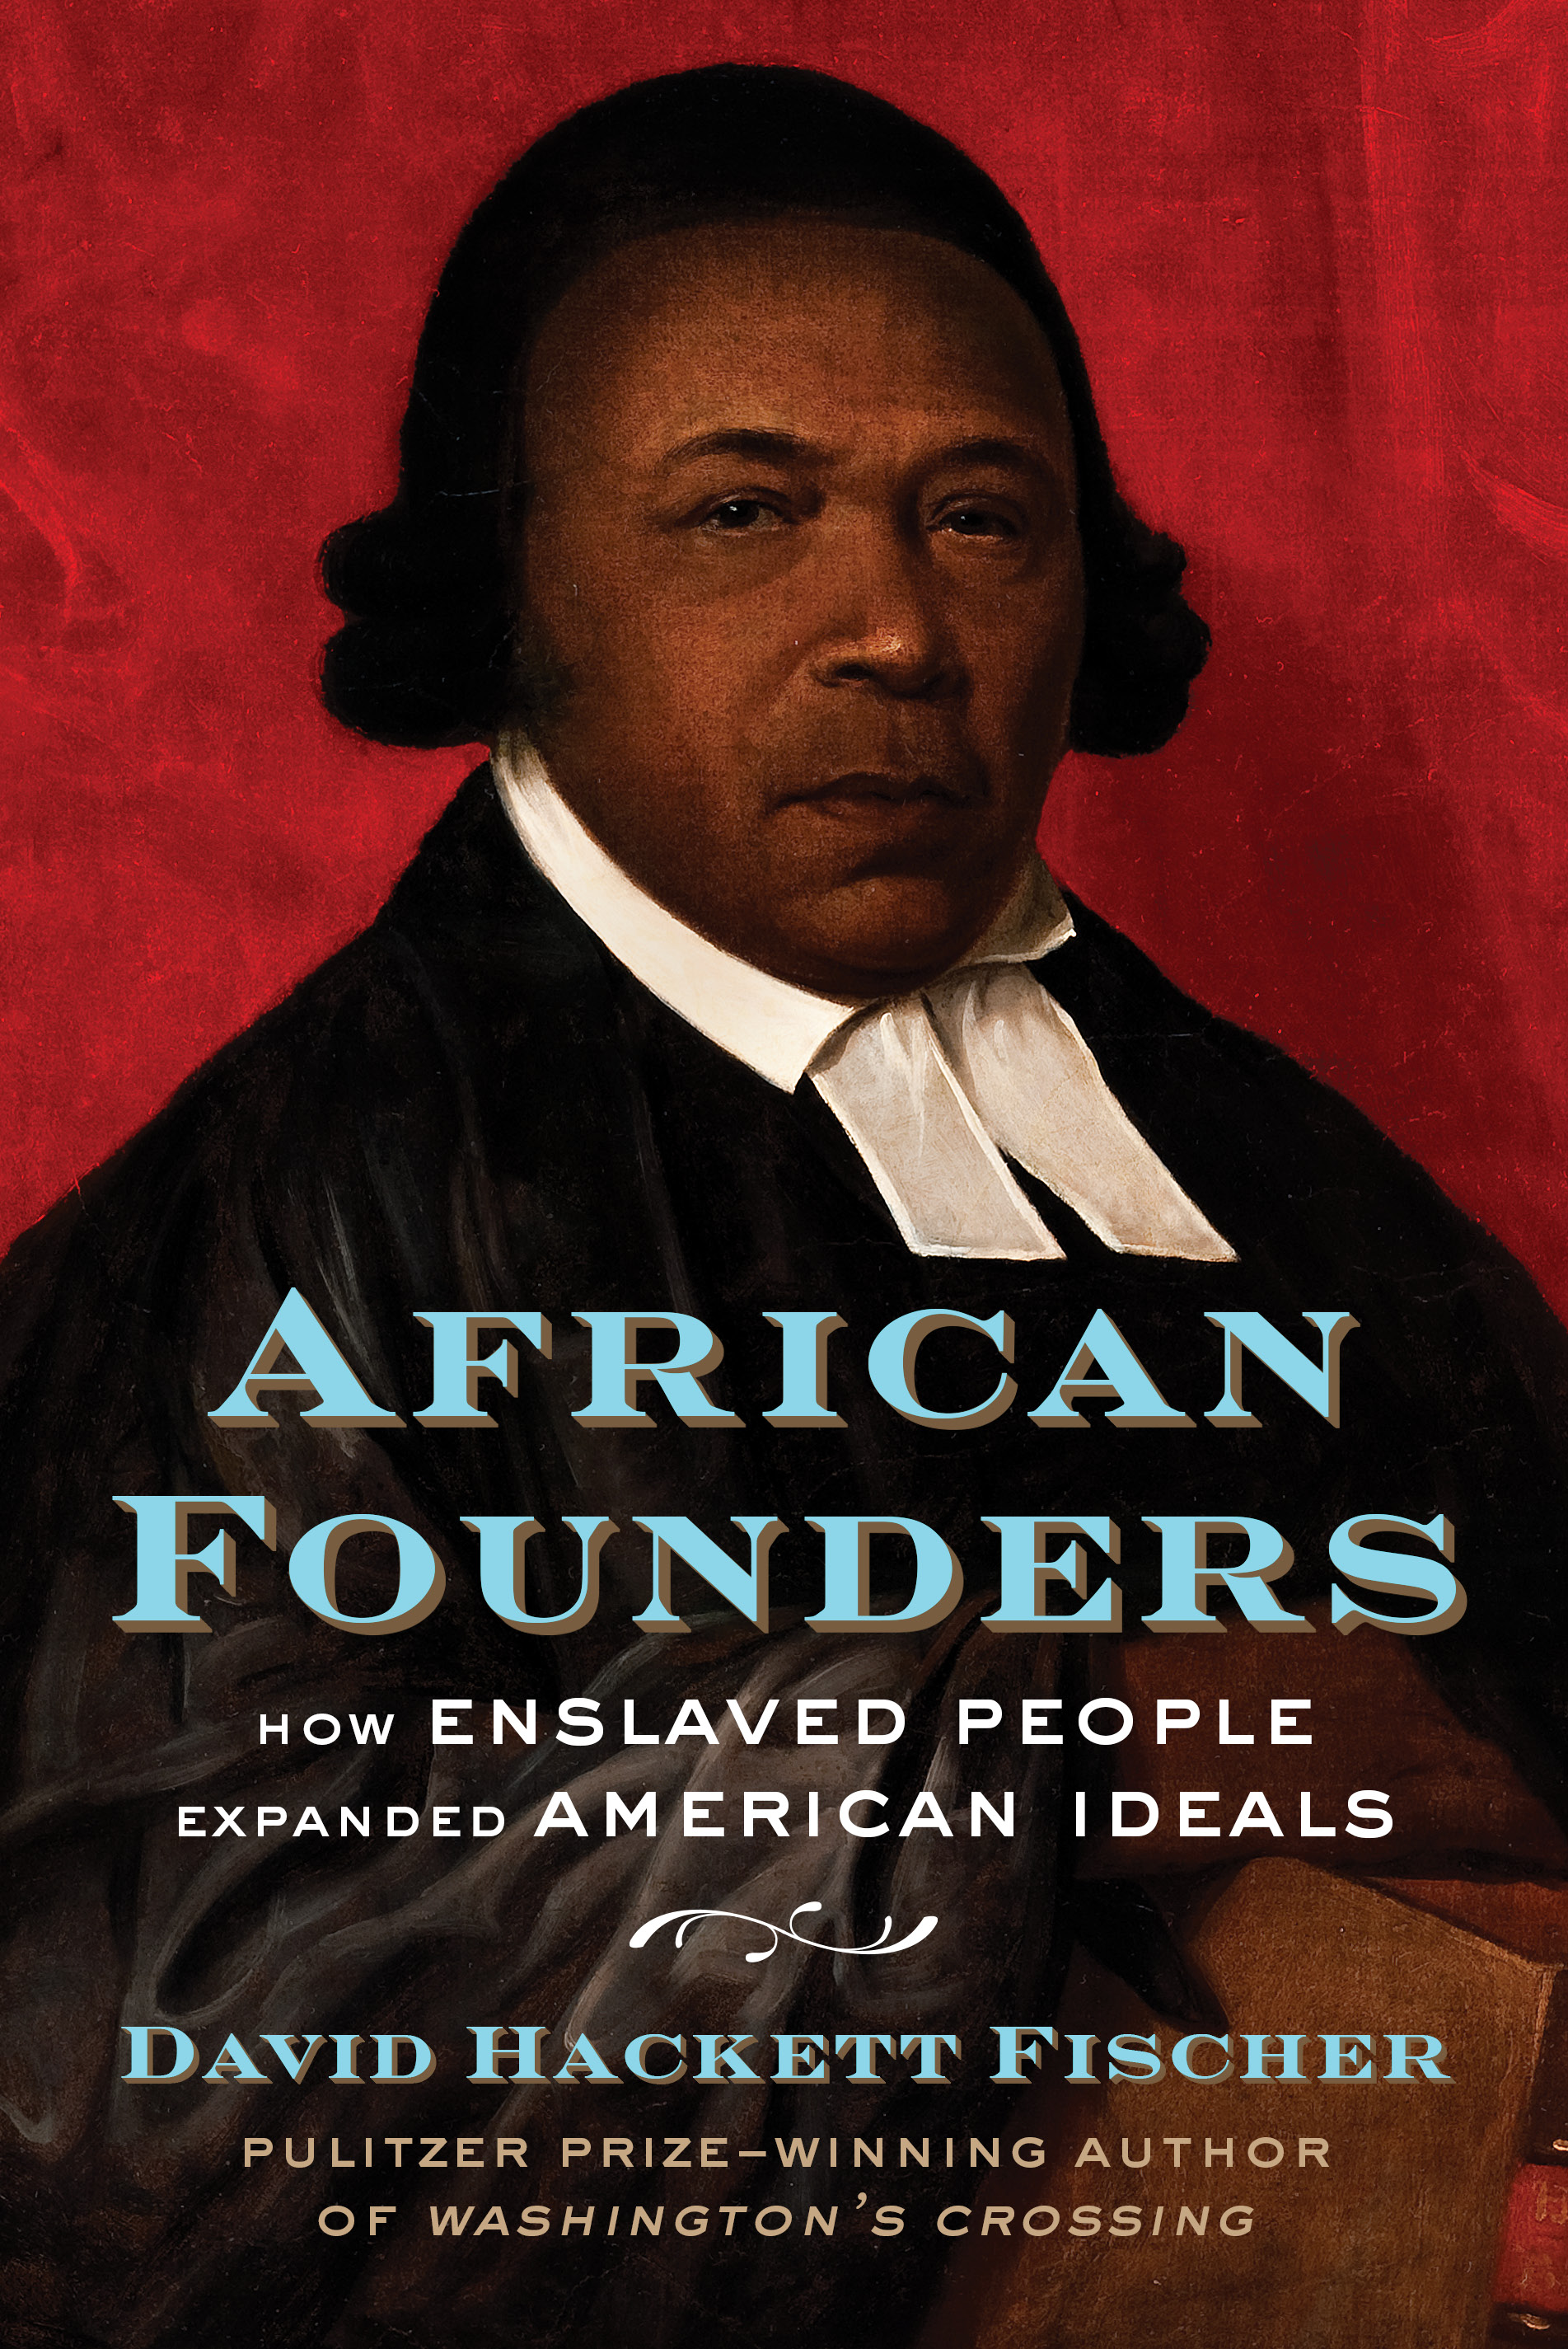 <em>African Founders: How Enslaved People Expanded American Ideals</em>, is an encyclopedia of enslaved people’s experiences in the United States from the 17th century to the 19th century. (Simon &amp; Schuster)